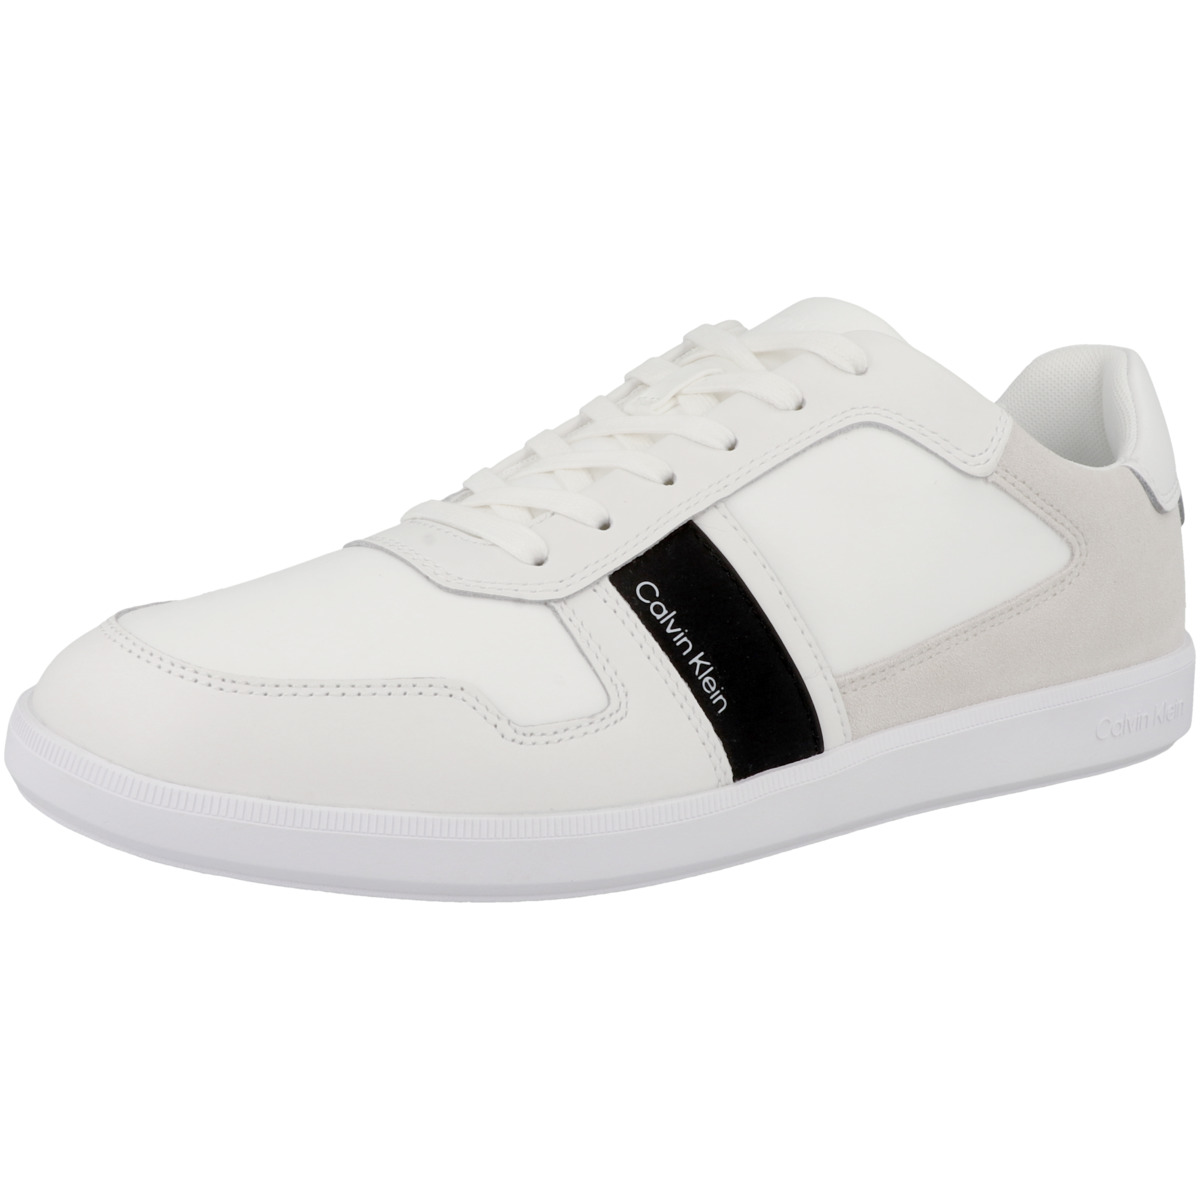 Calvin Klein Low Top Lace Up Mix Sneaker low